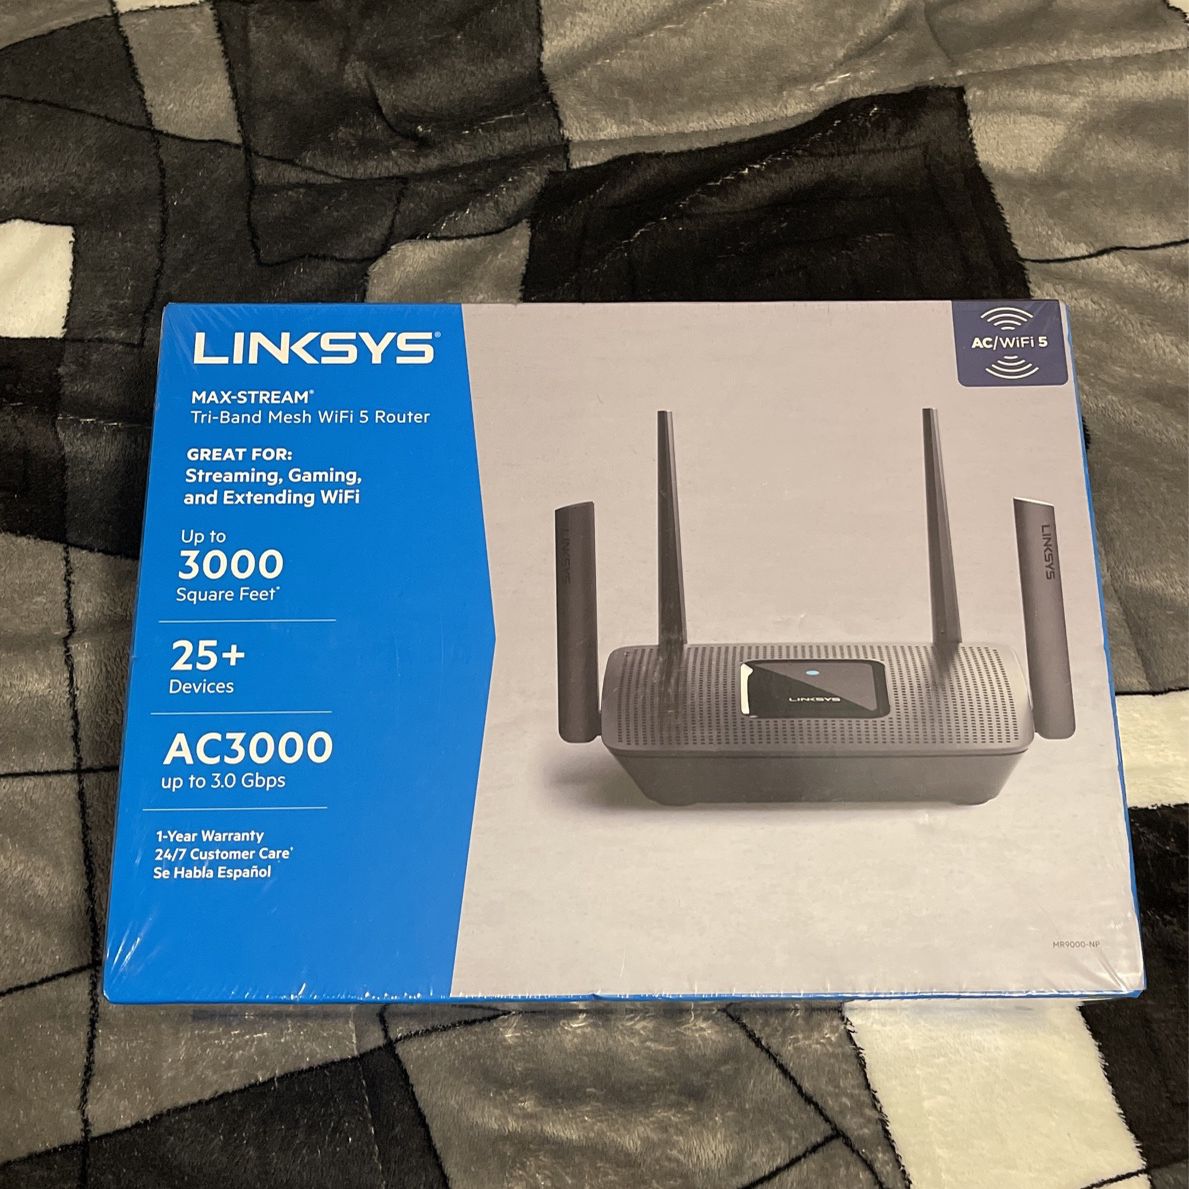 BRAND NEW LINKSYS MAX-STREAM TRI -BAND MESH WIFI 5 ROUTER GREAT FOR STREAMING GAMING AND EXTENDING WIFI AC3000